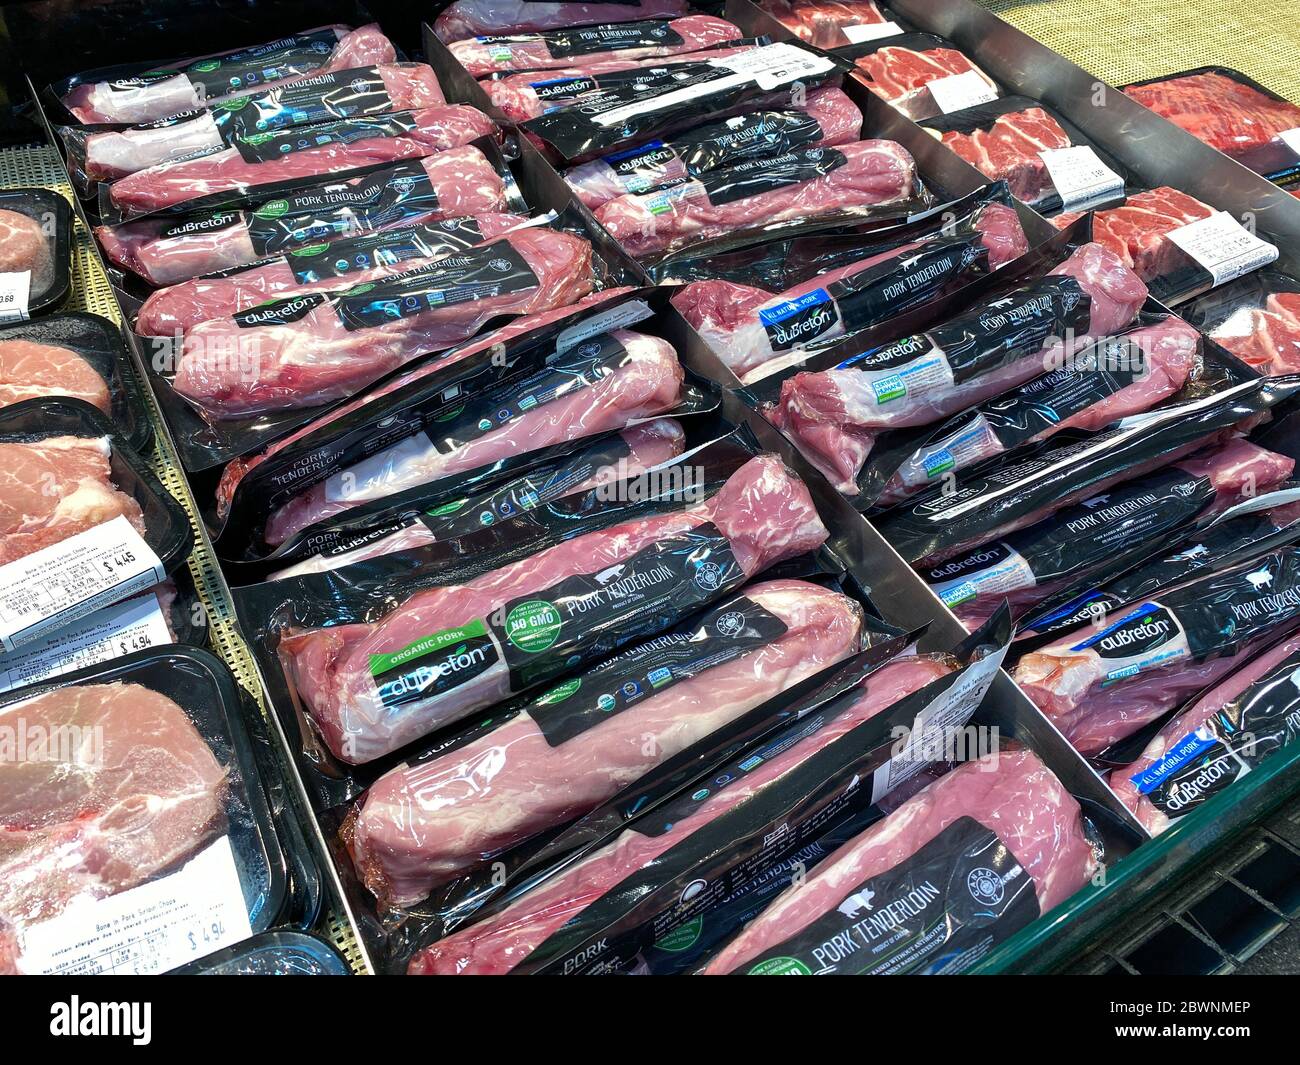 Orlando,FL/USA -5/10/20:  A refrigerated case of packaged pork tenderloin ready for customers to purchase at a Whole Foods Market grocery store. Stock Photo